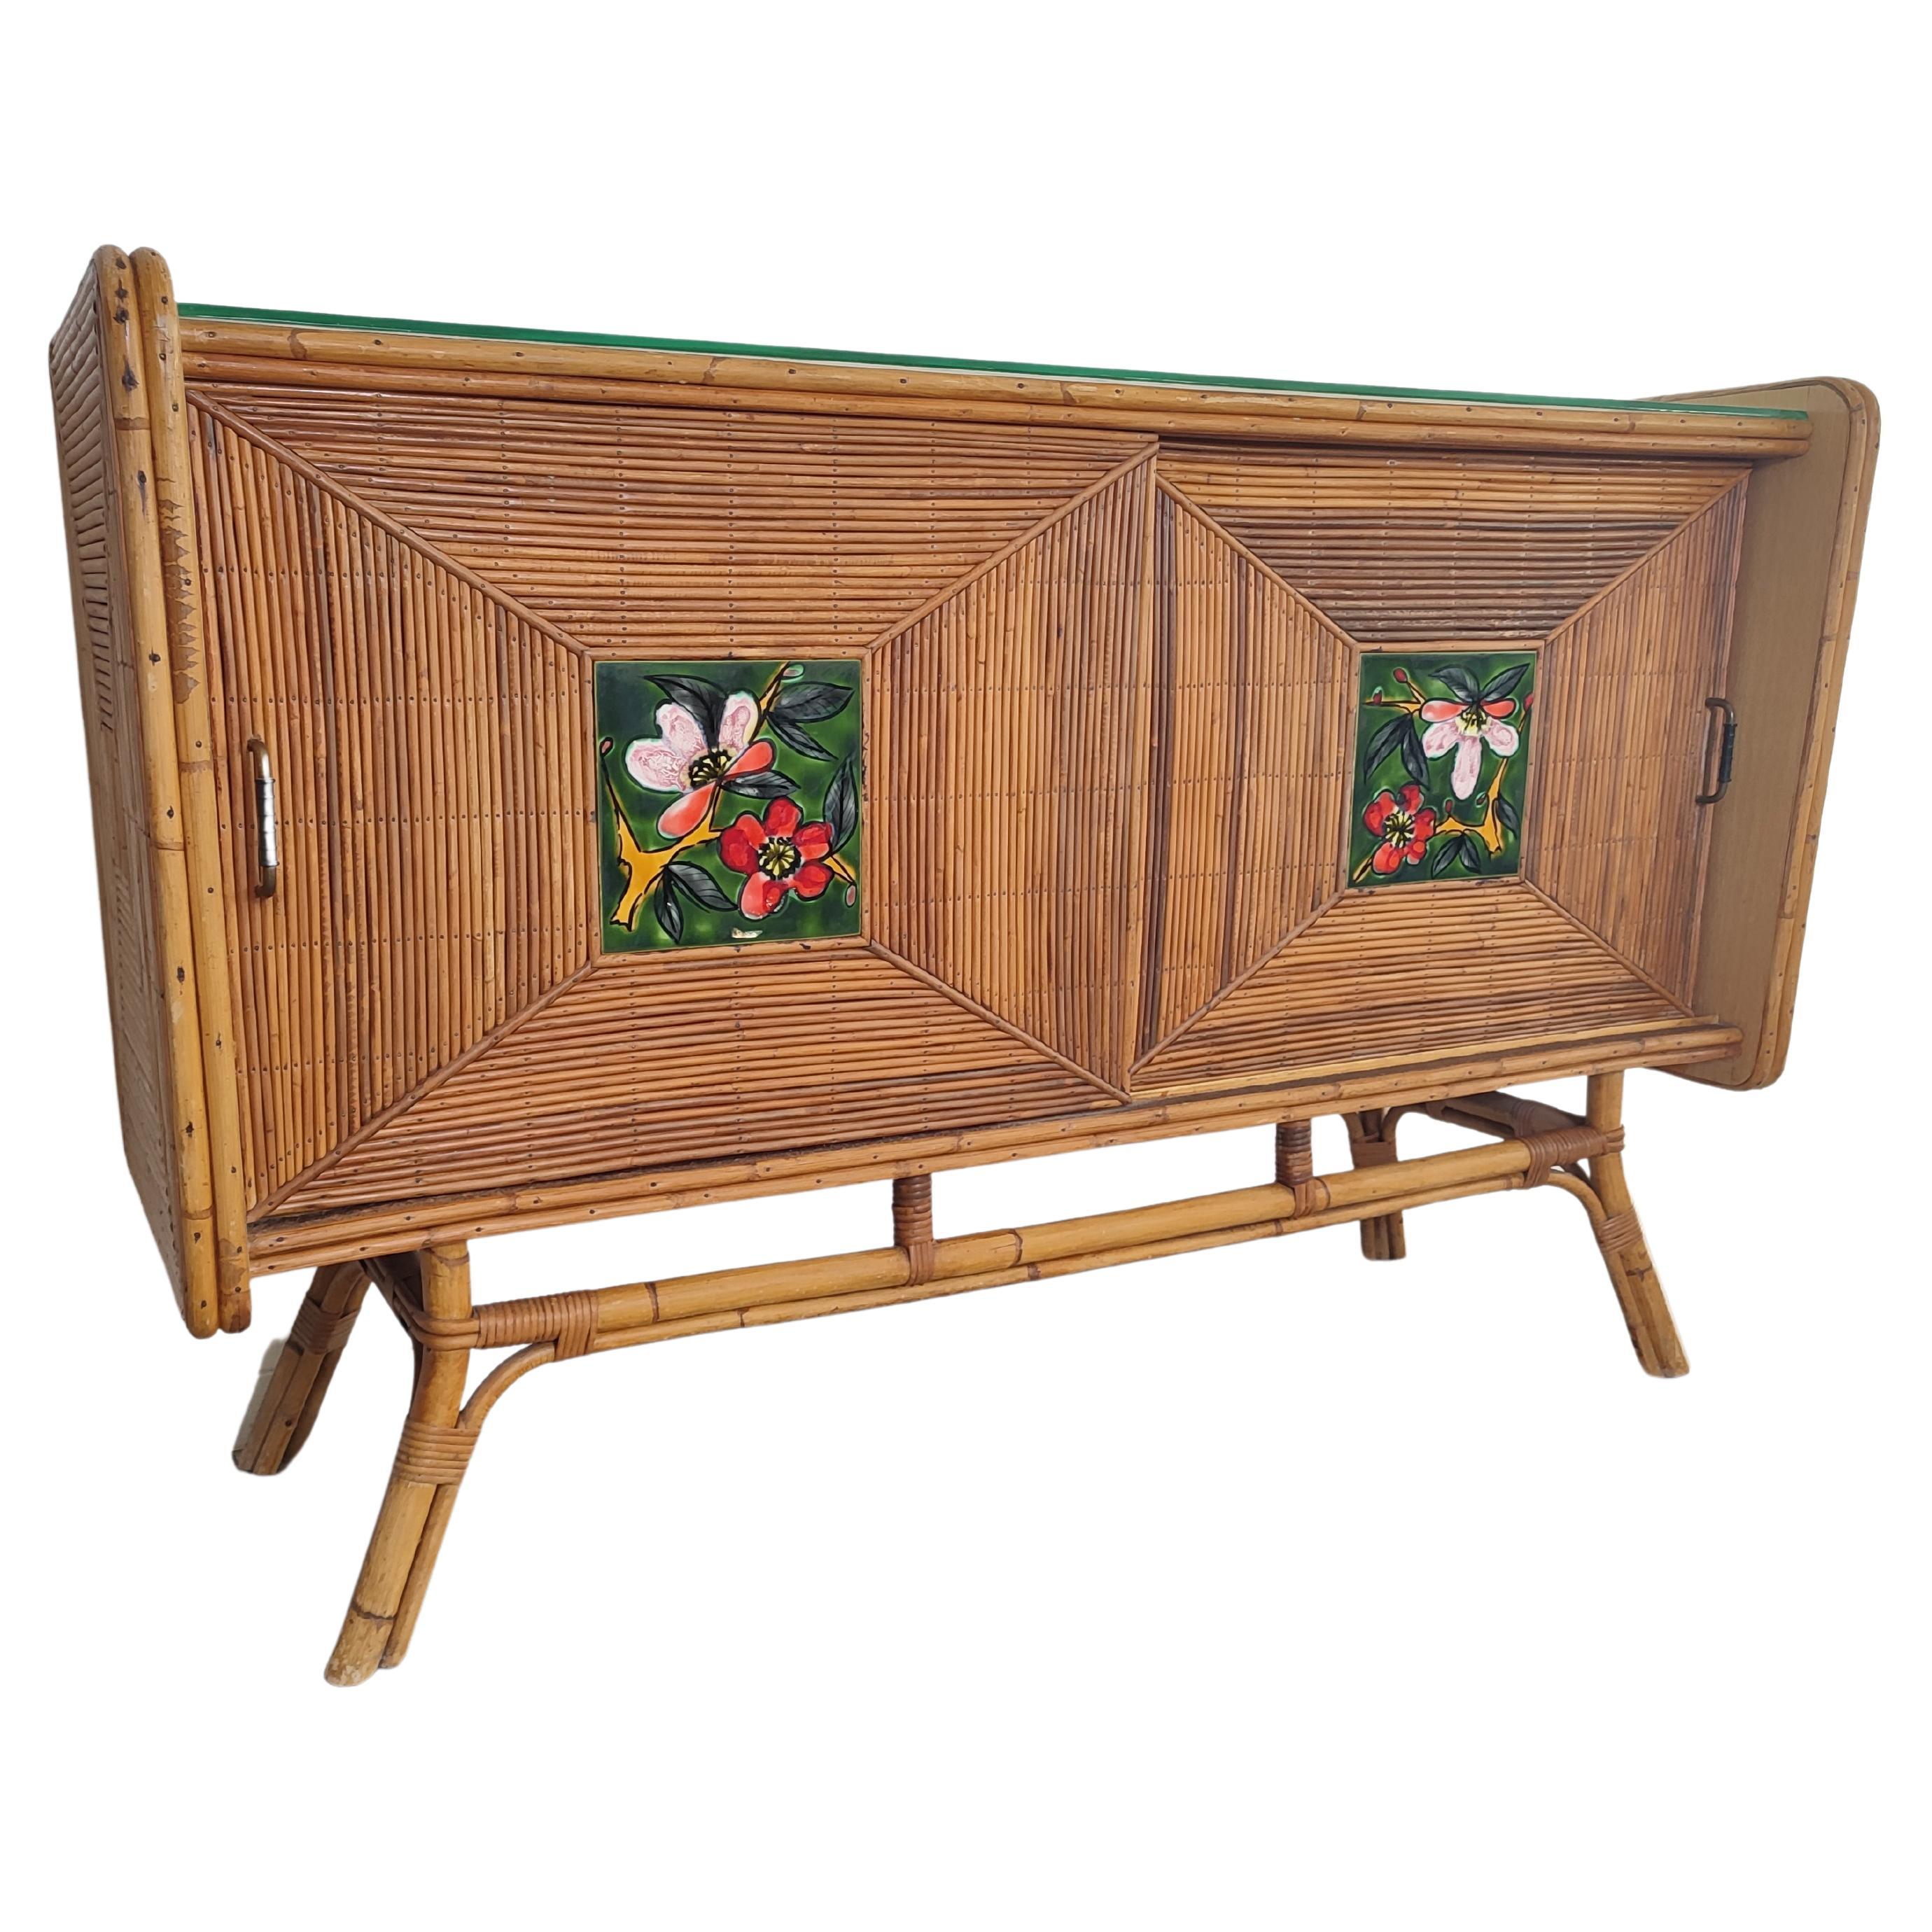 Small Sized Credenza from "Adrien Audoux et Frida Minet"